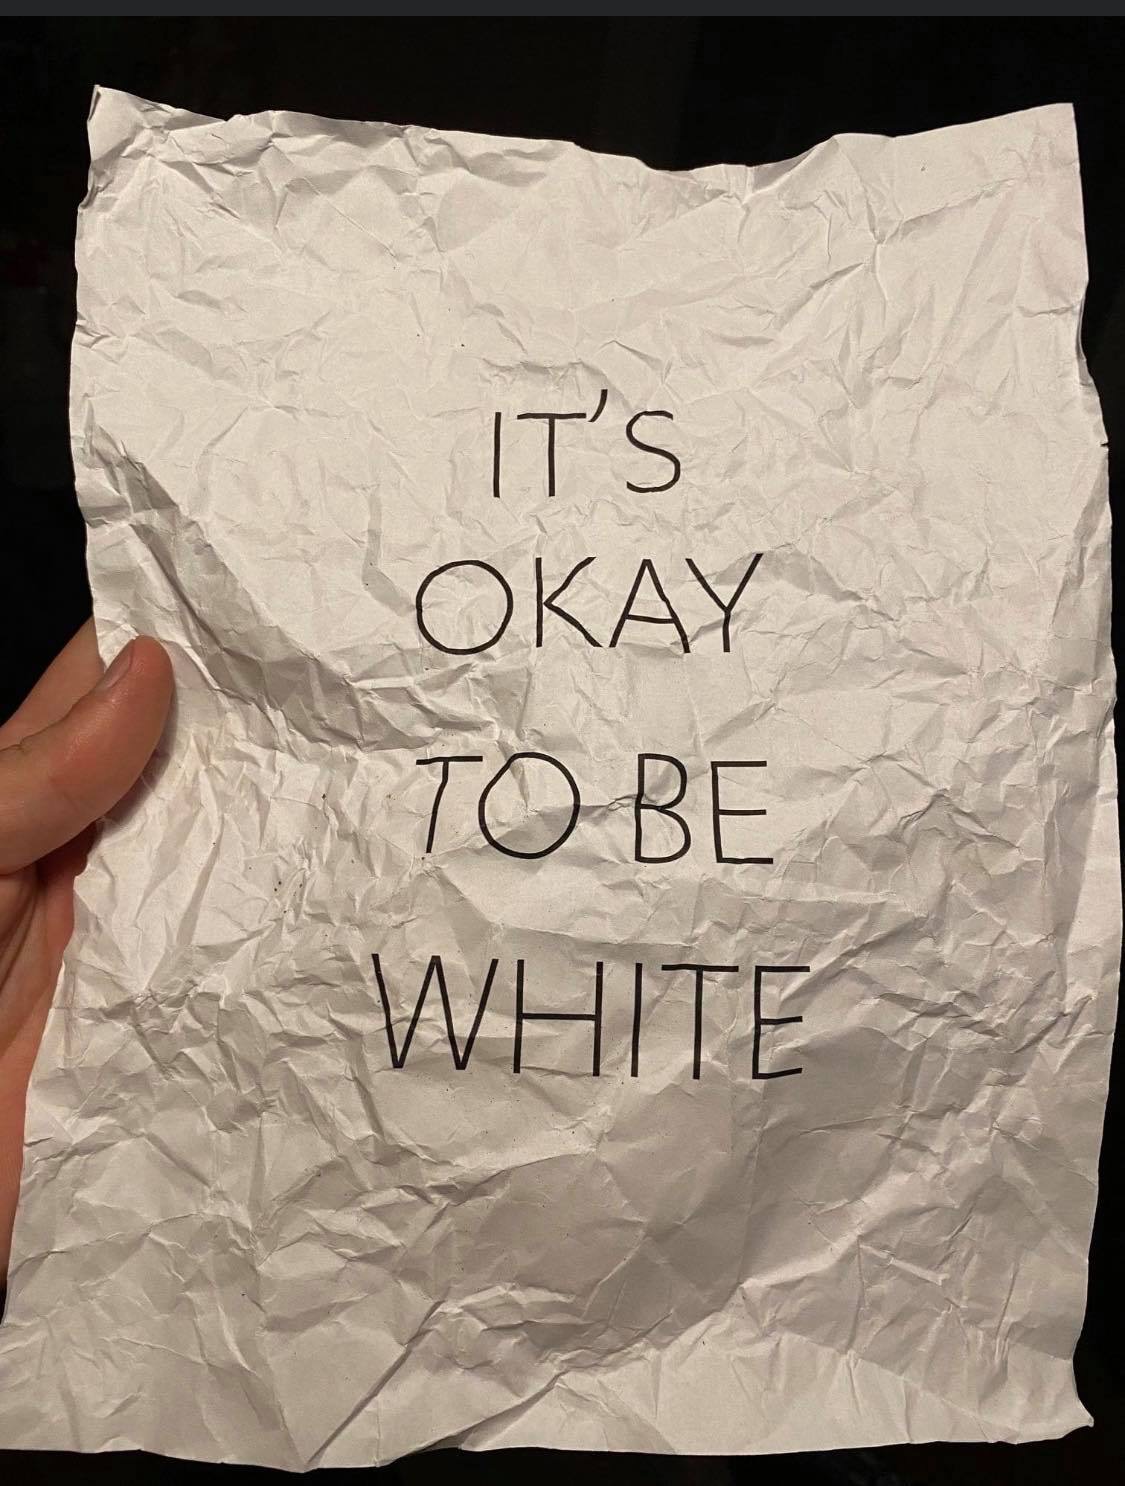 Thumbnail for “It’s OK to be white” flyers return to South Pasadena